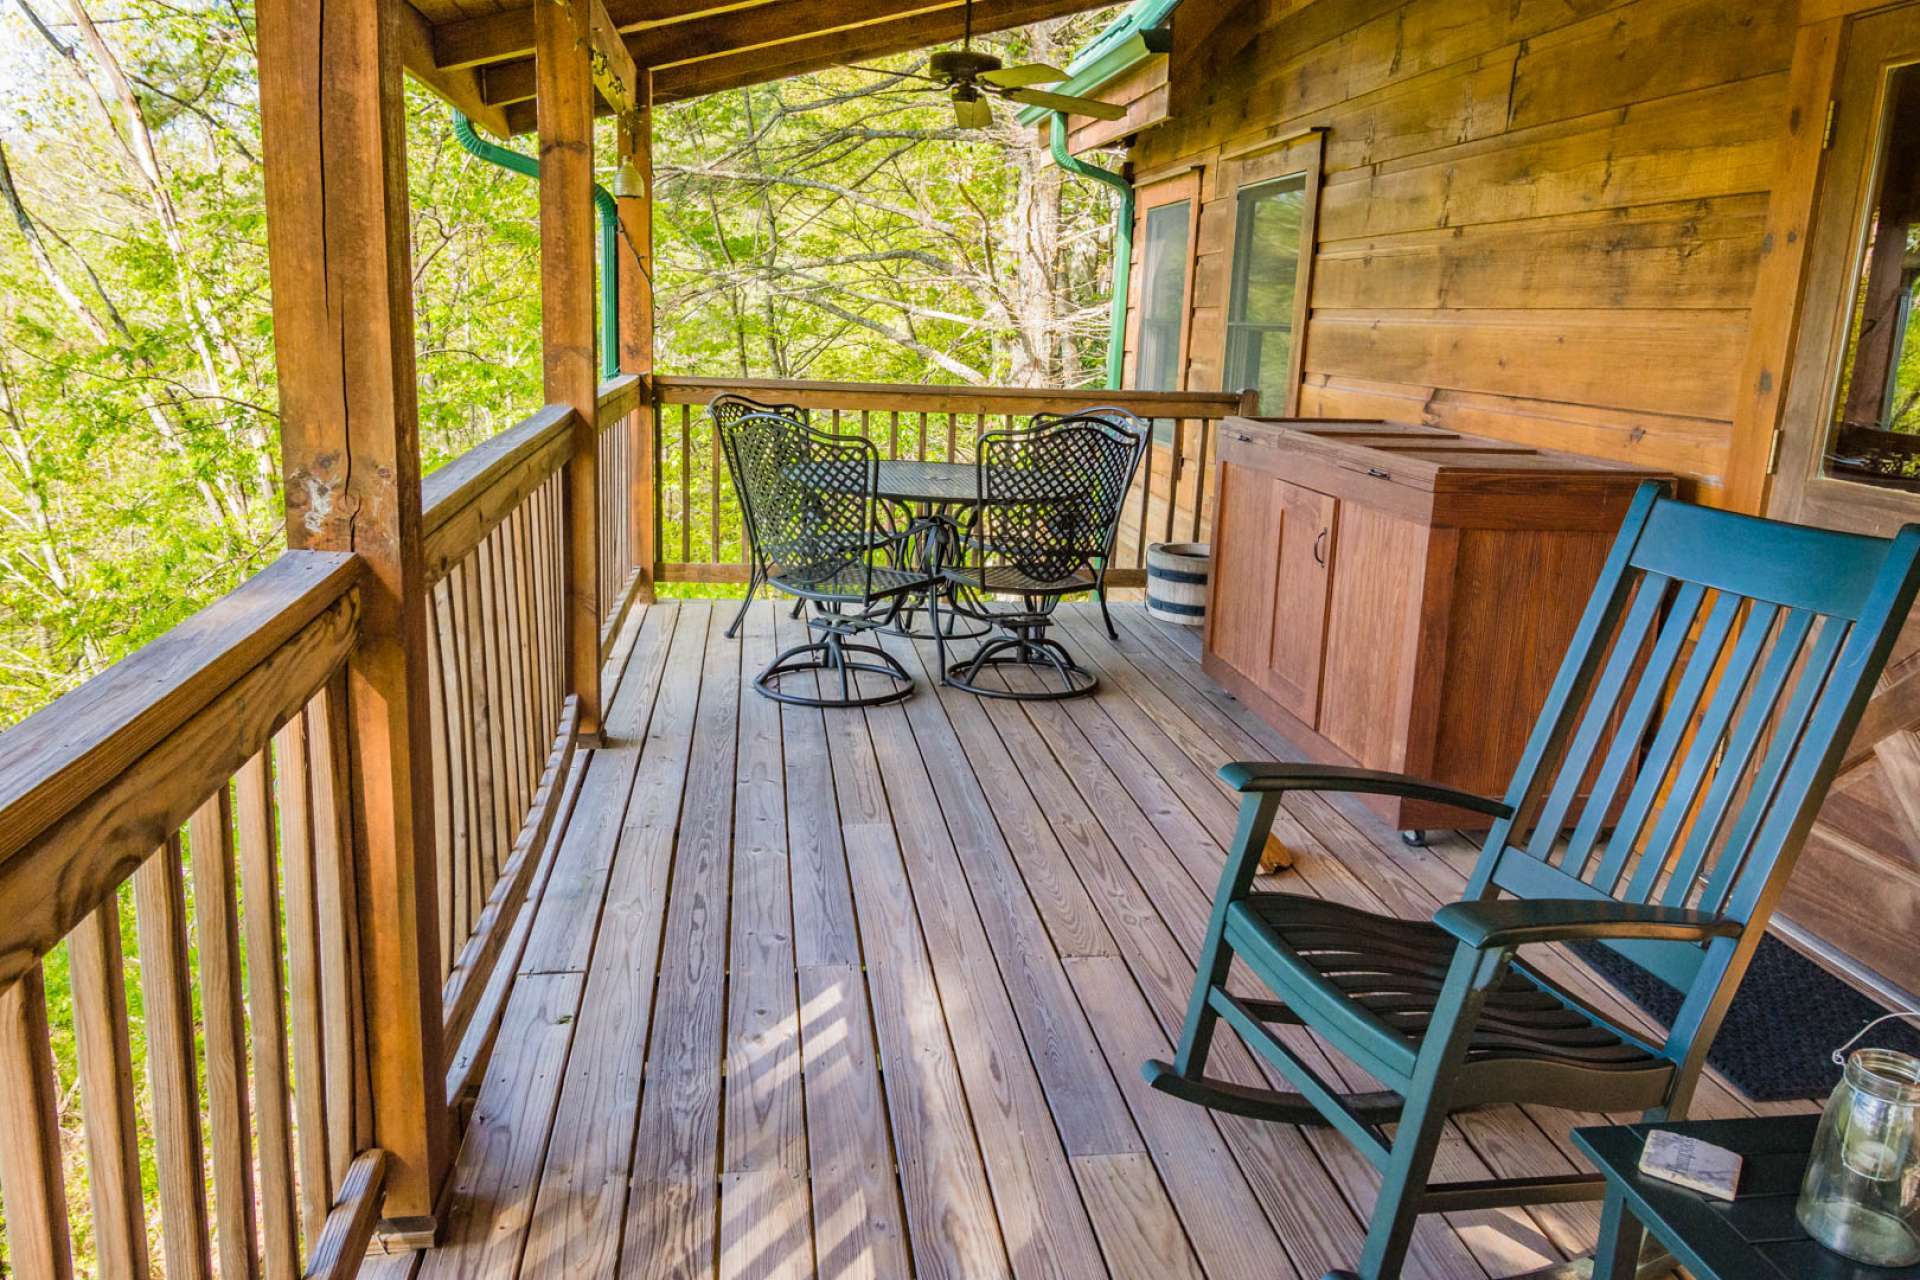 The main level covered deck offers a relaxing space for outdoor dining.